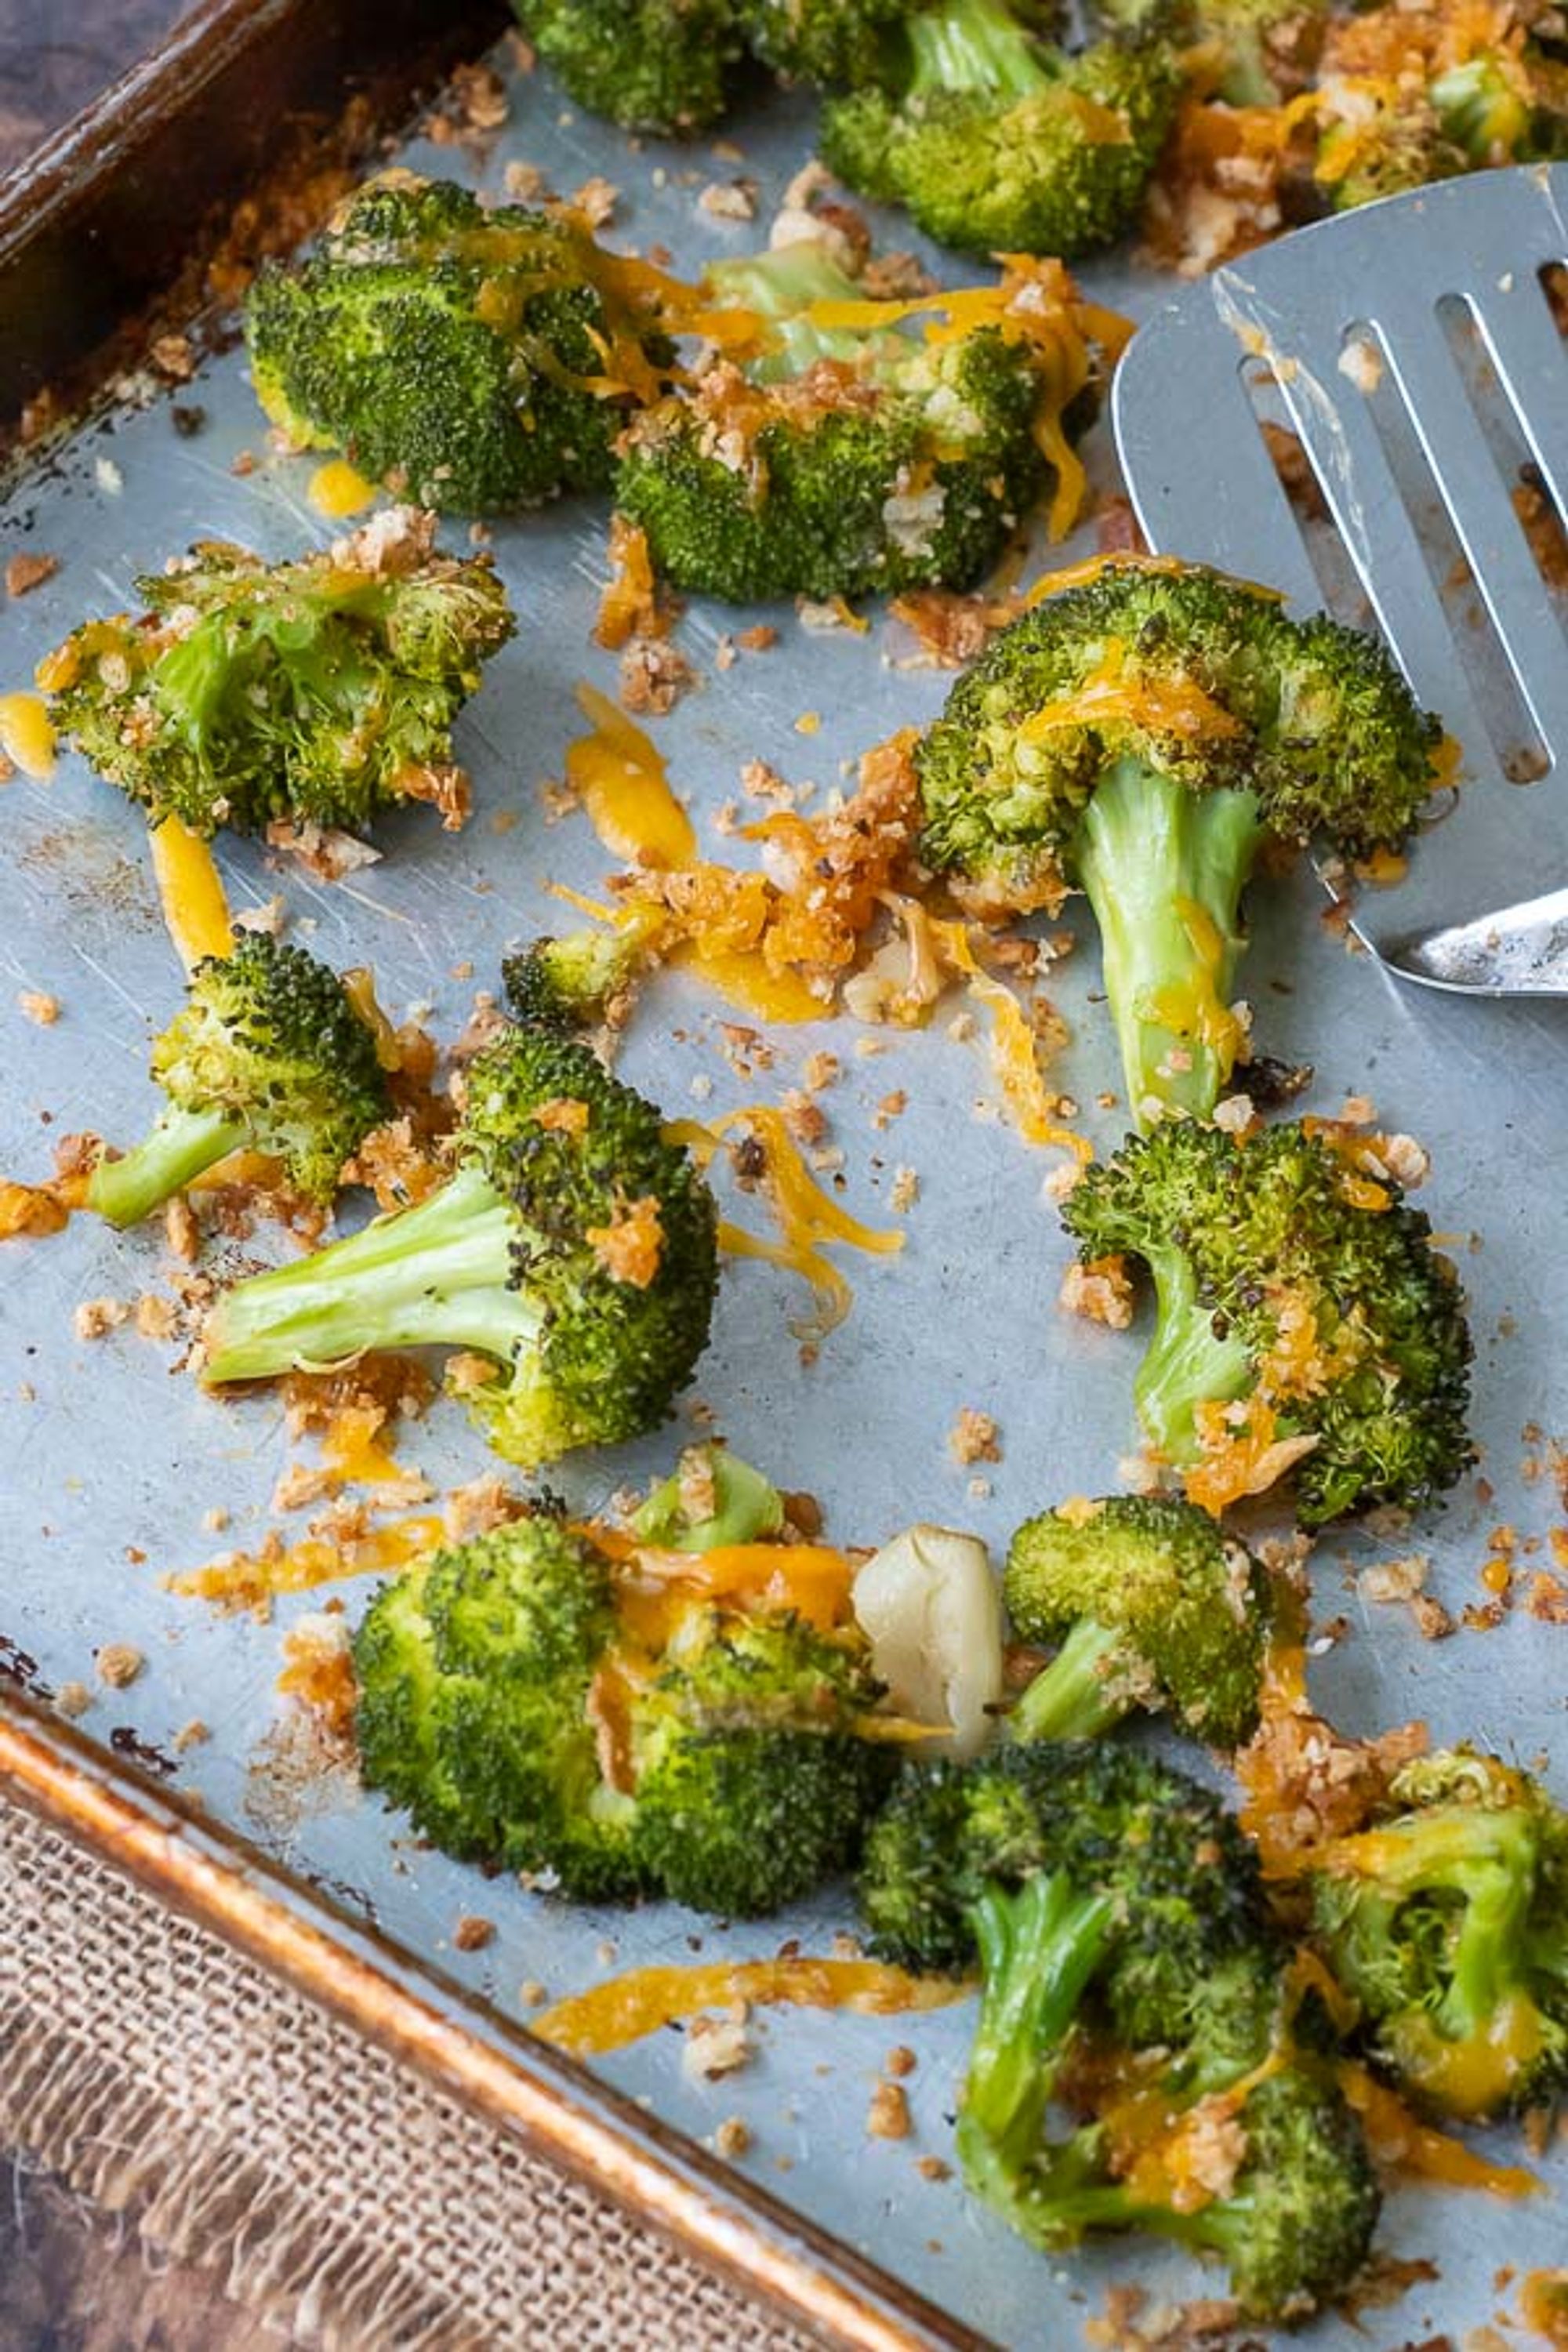 Baked Broccoli and Cheese Crispy, Cheesy Oven Roasted